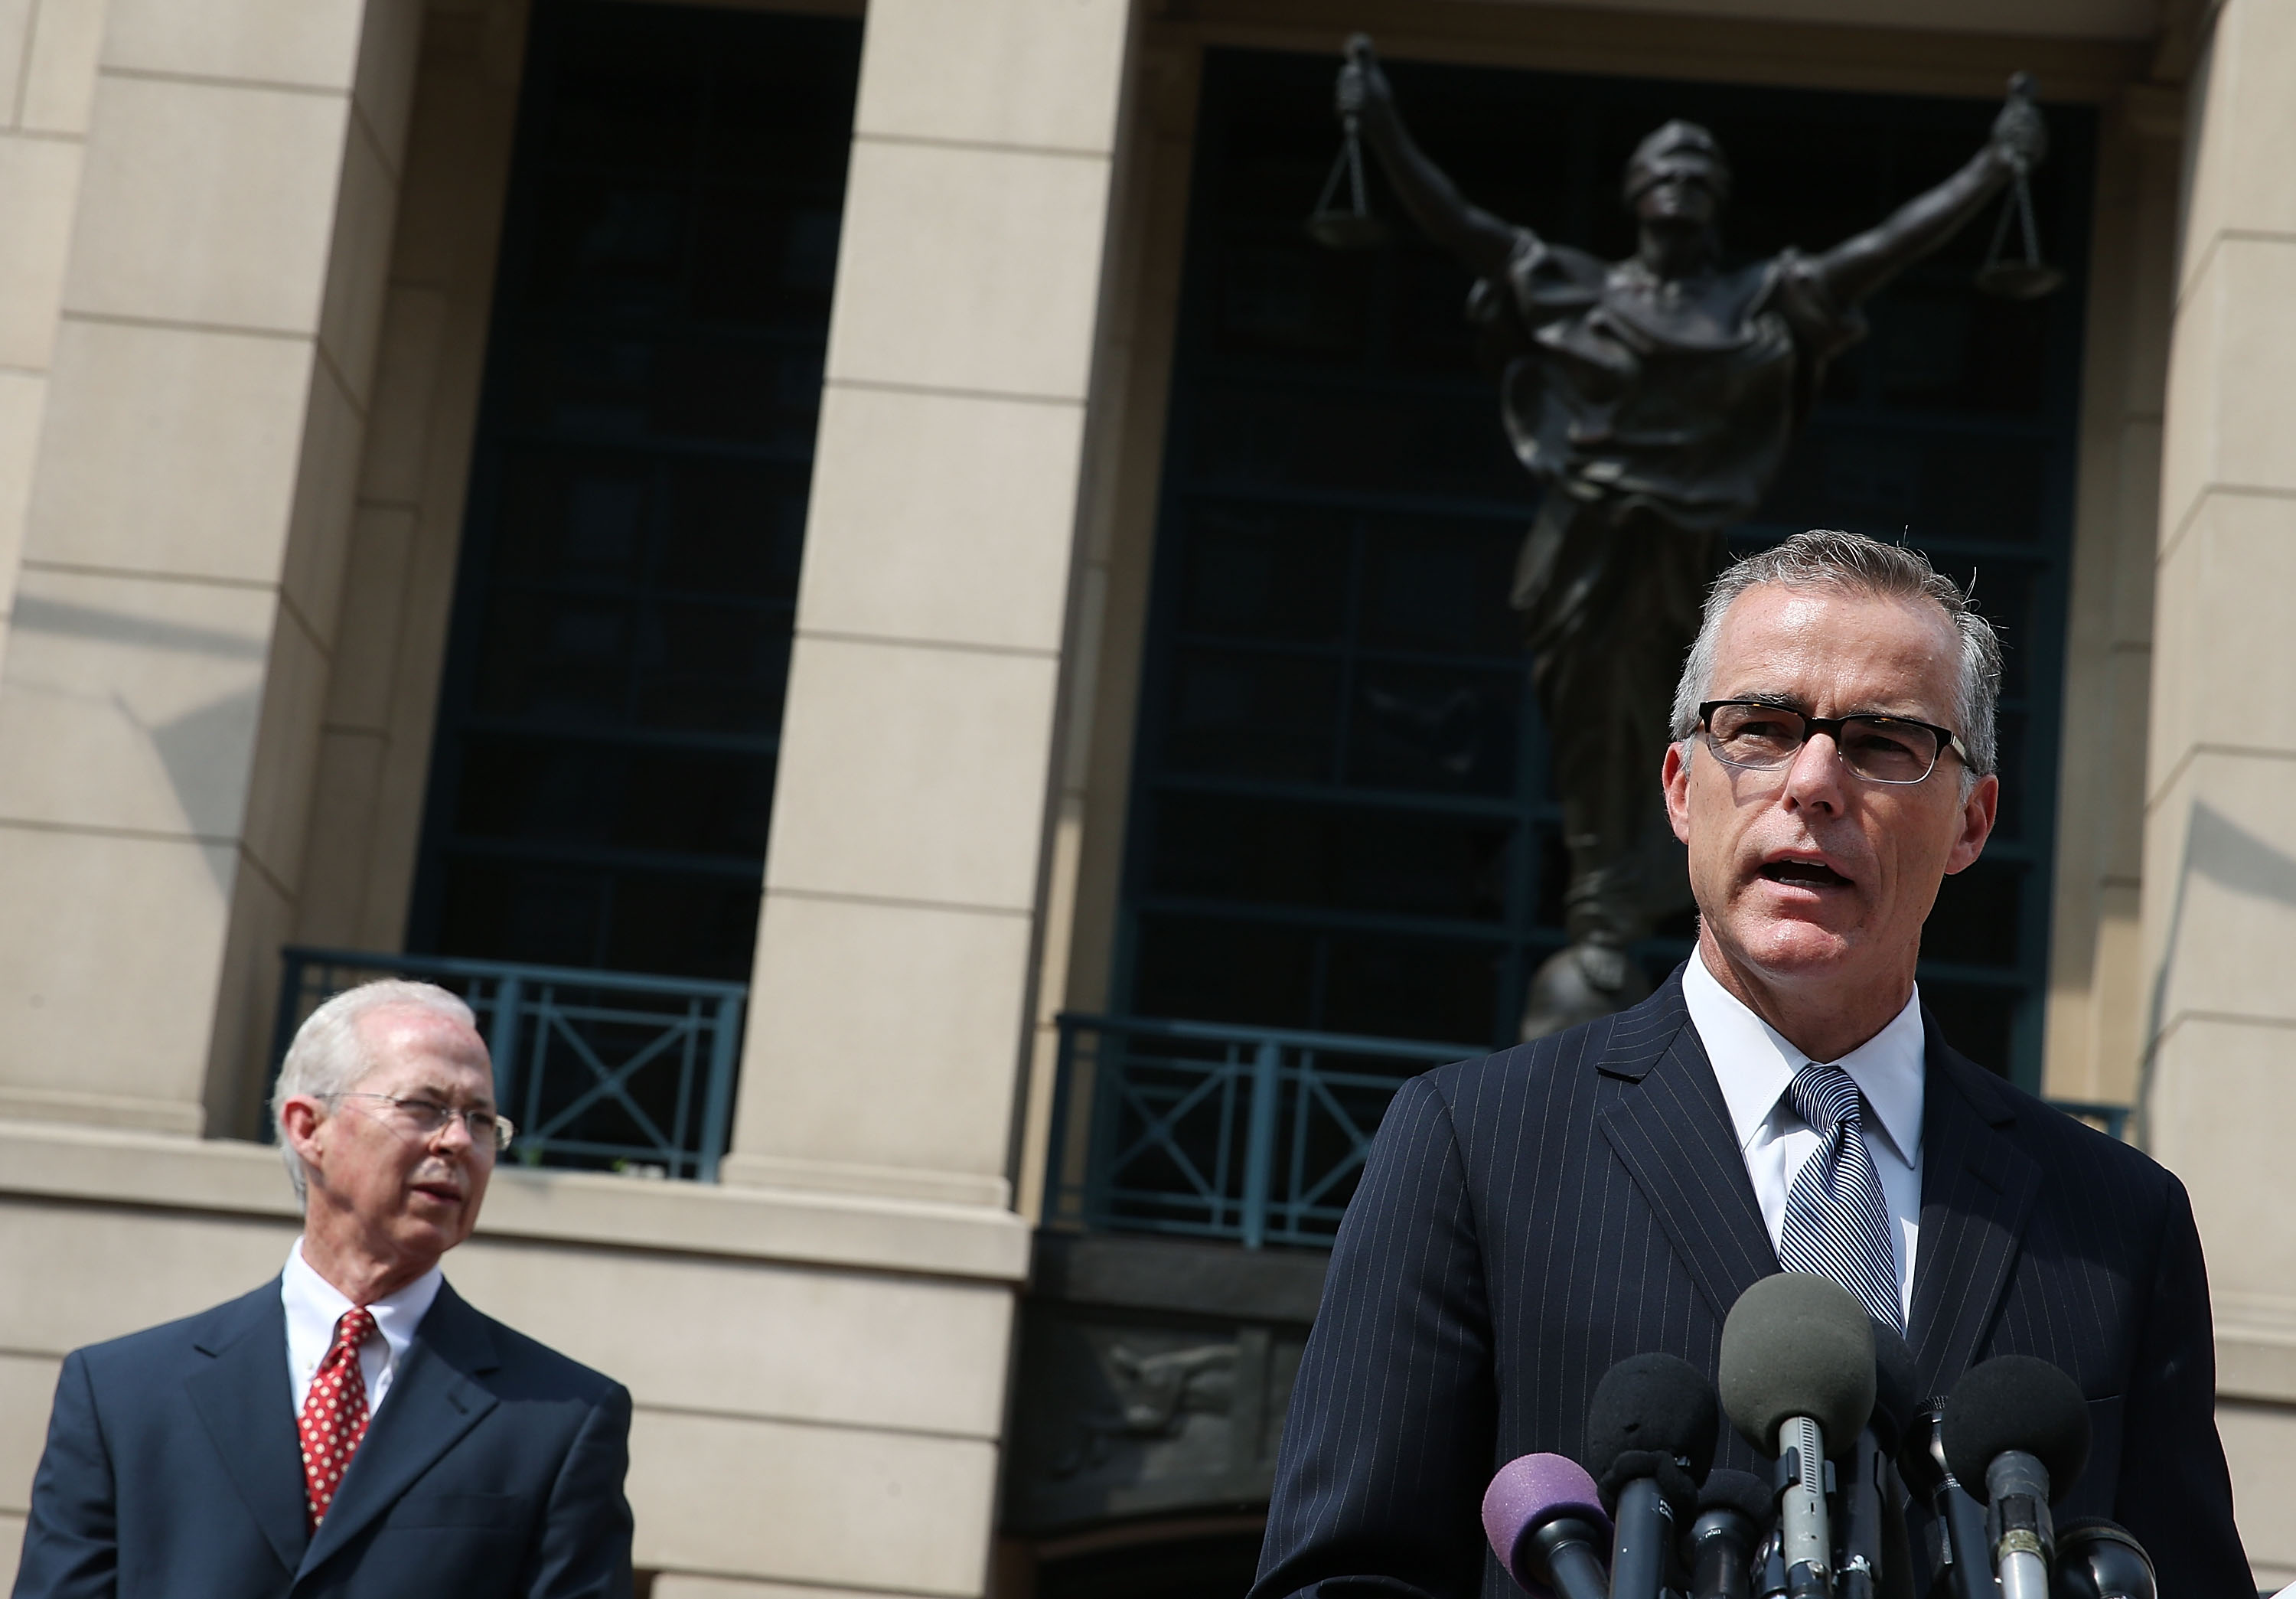 Andrew G. McCabe (R), Assistant Director of the FBI's Washington Field Office speaks while flanked by Dana J. Boente (L), U.S. Attorney for the Eastern District of Virginia, after a hearing in federal court June 11, 2015 in Alexandria, Virginia. (Mark Wilson—Getty Images)